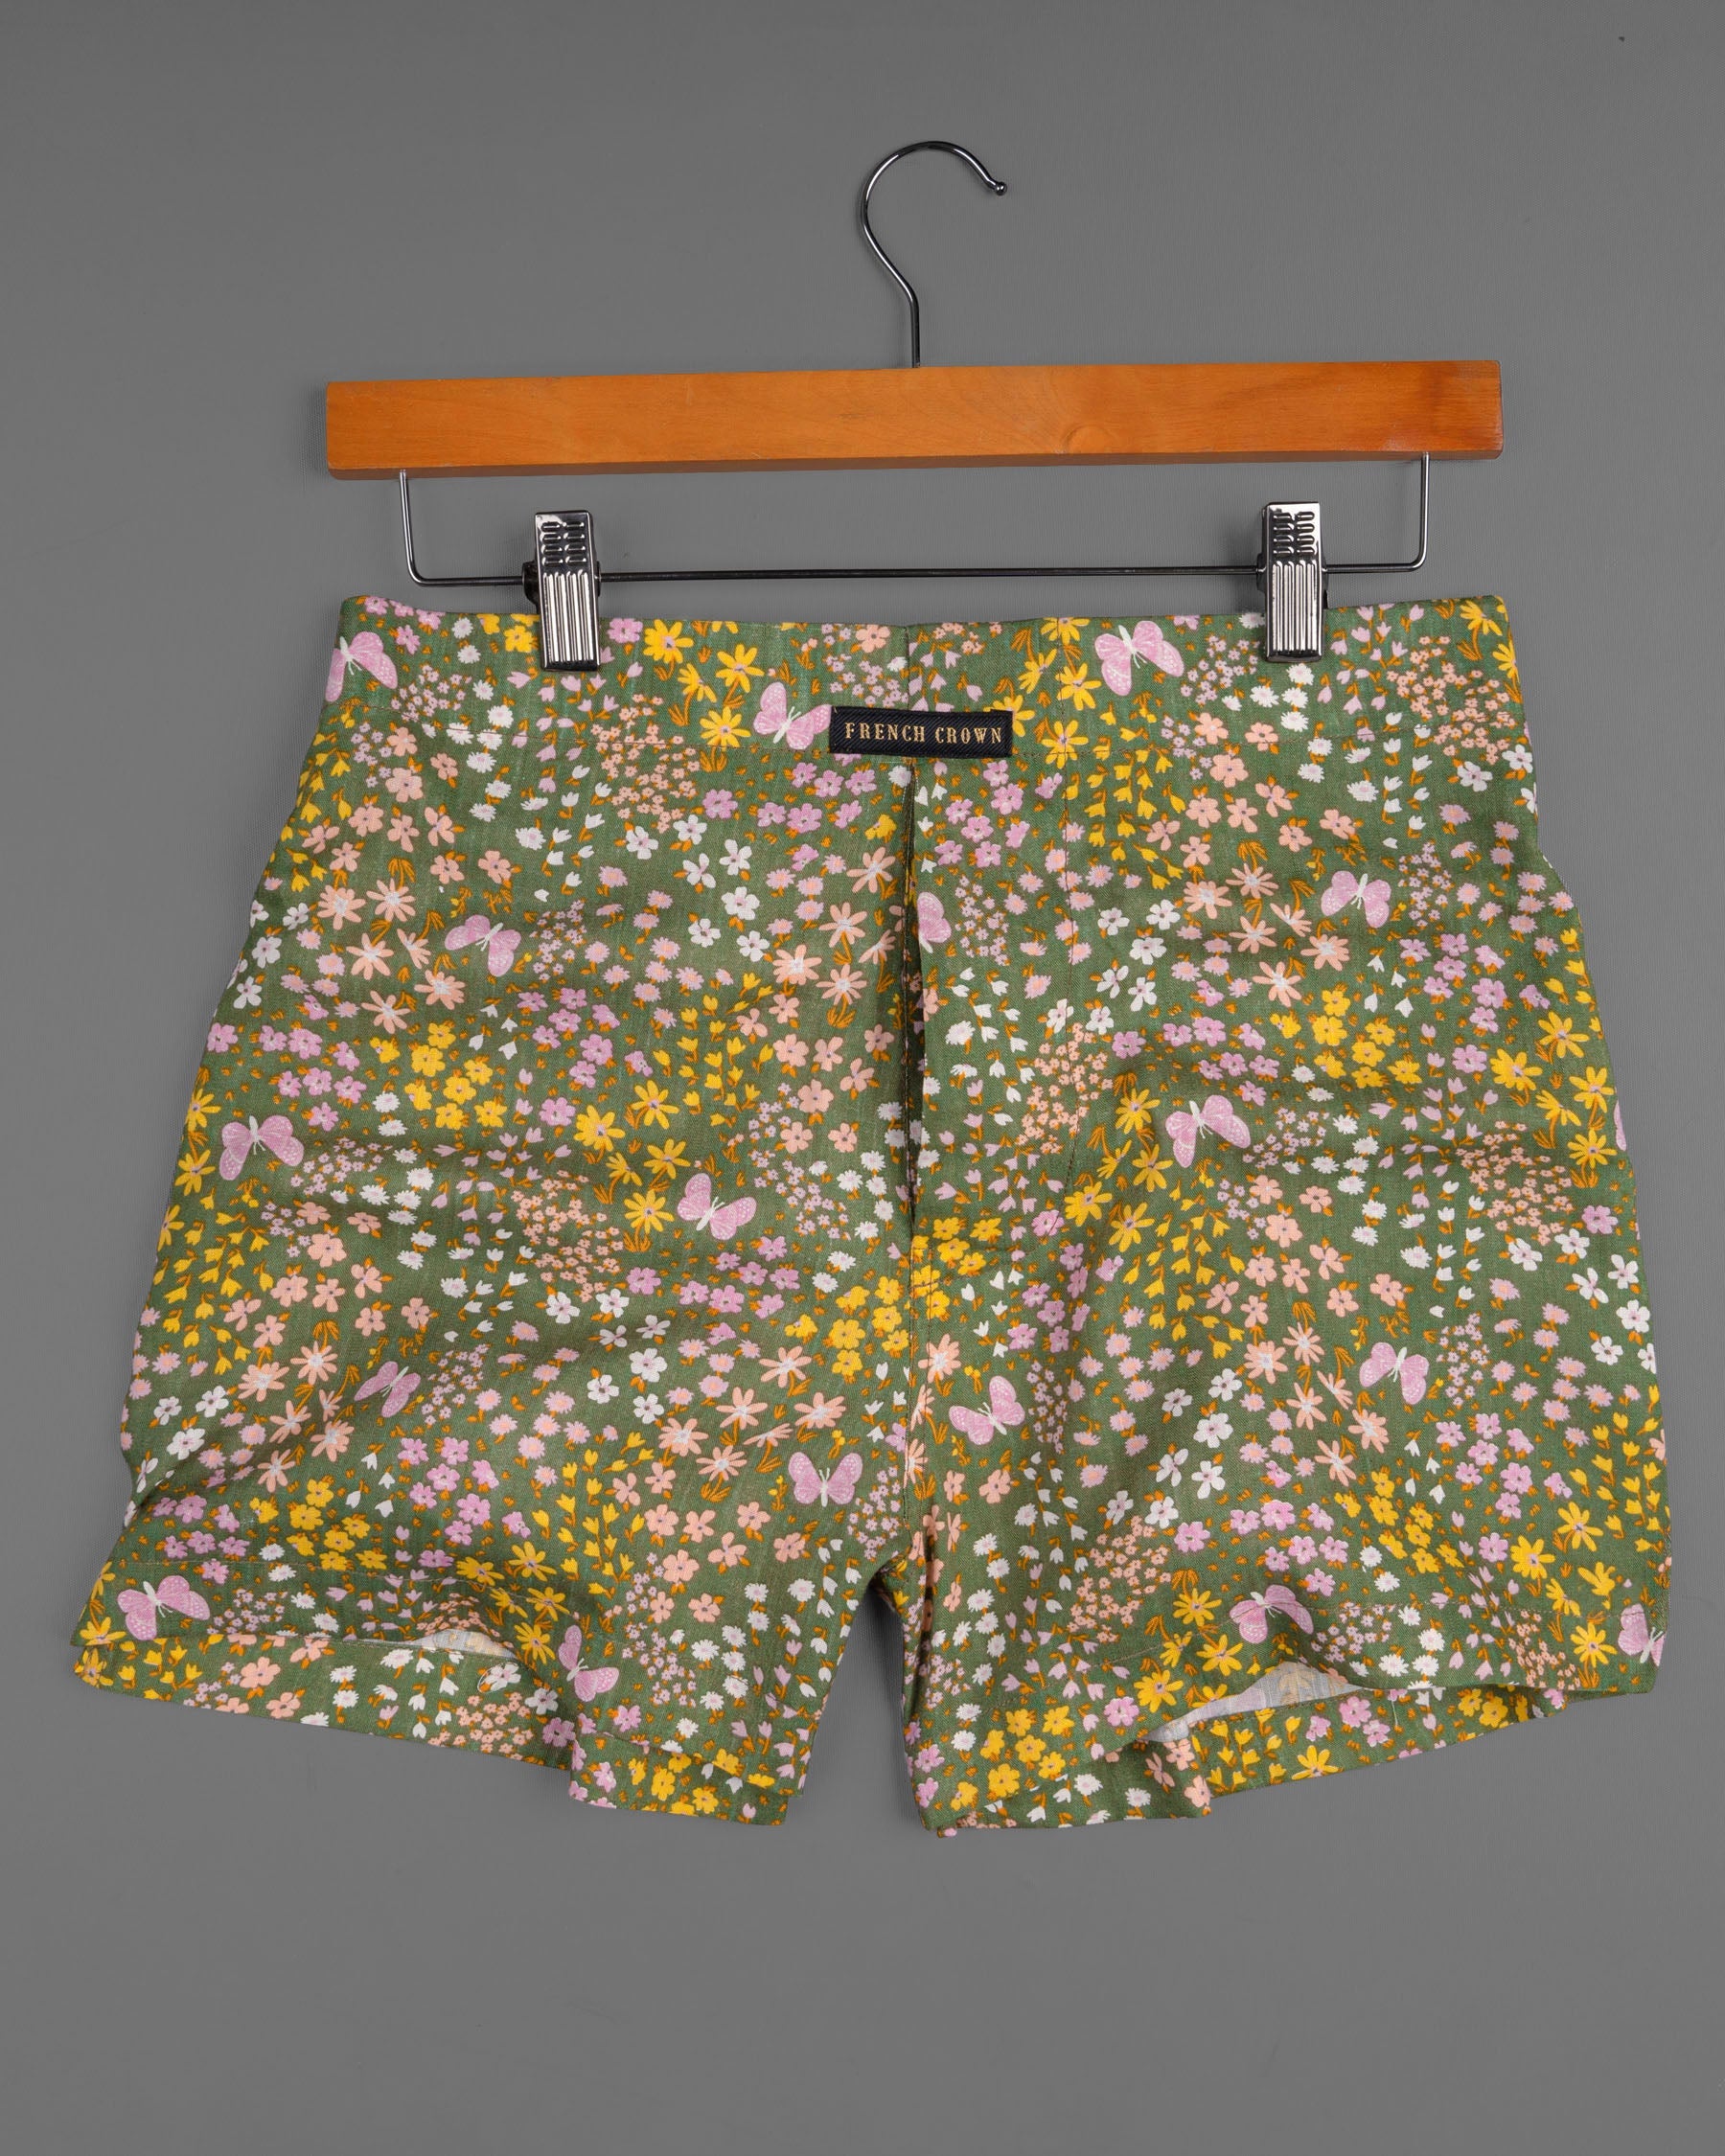 Bright White and Tamarillo Red with Camouflage Green and Saffron Floral Printed Premium Tencel Boxers CBX422-28, CBX422-30, CBX422-32, CBX422-34, CBX422-36, CBX422-38, CBX422-40, CBX422-42, CBX422-44